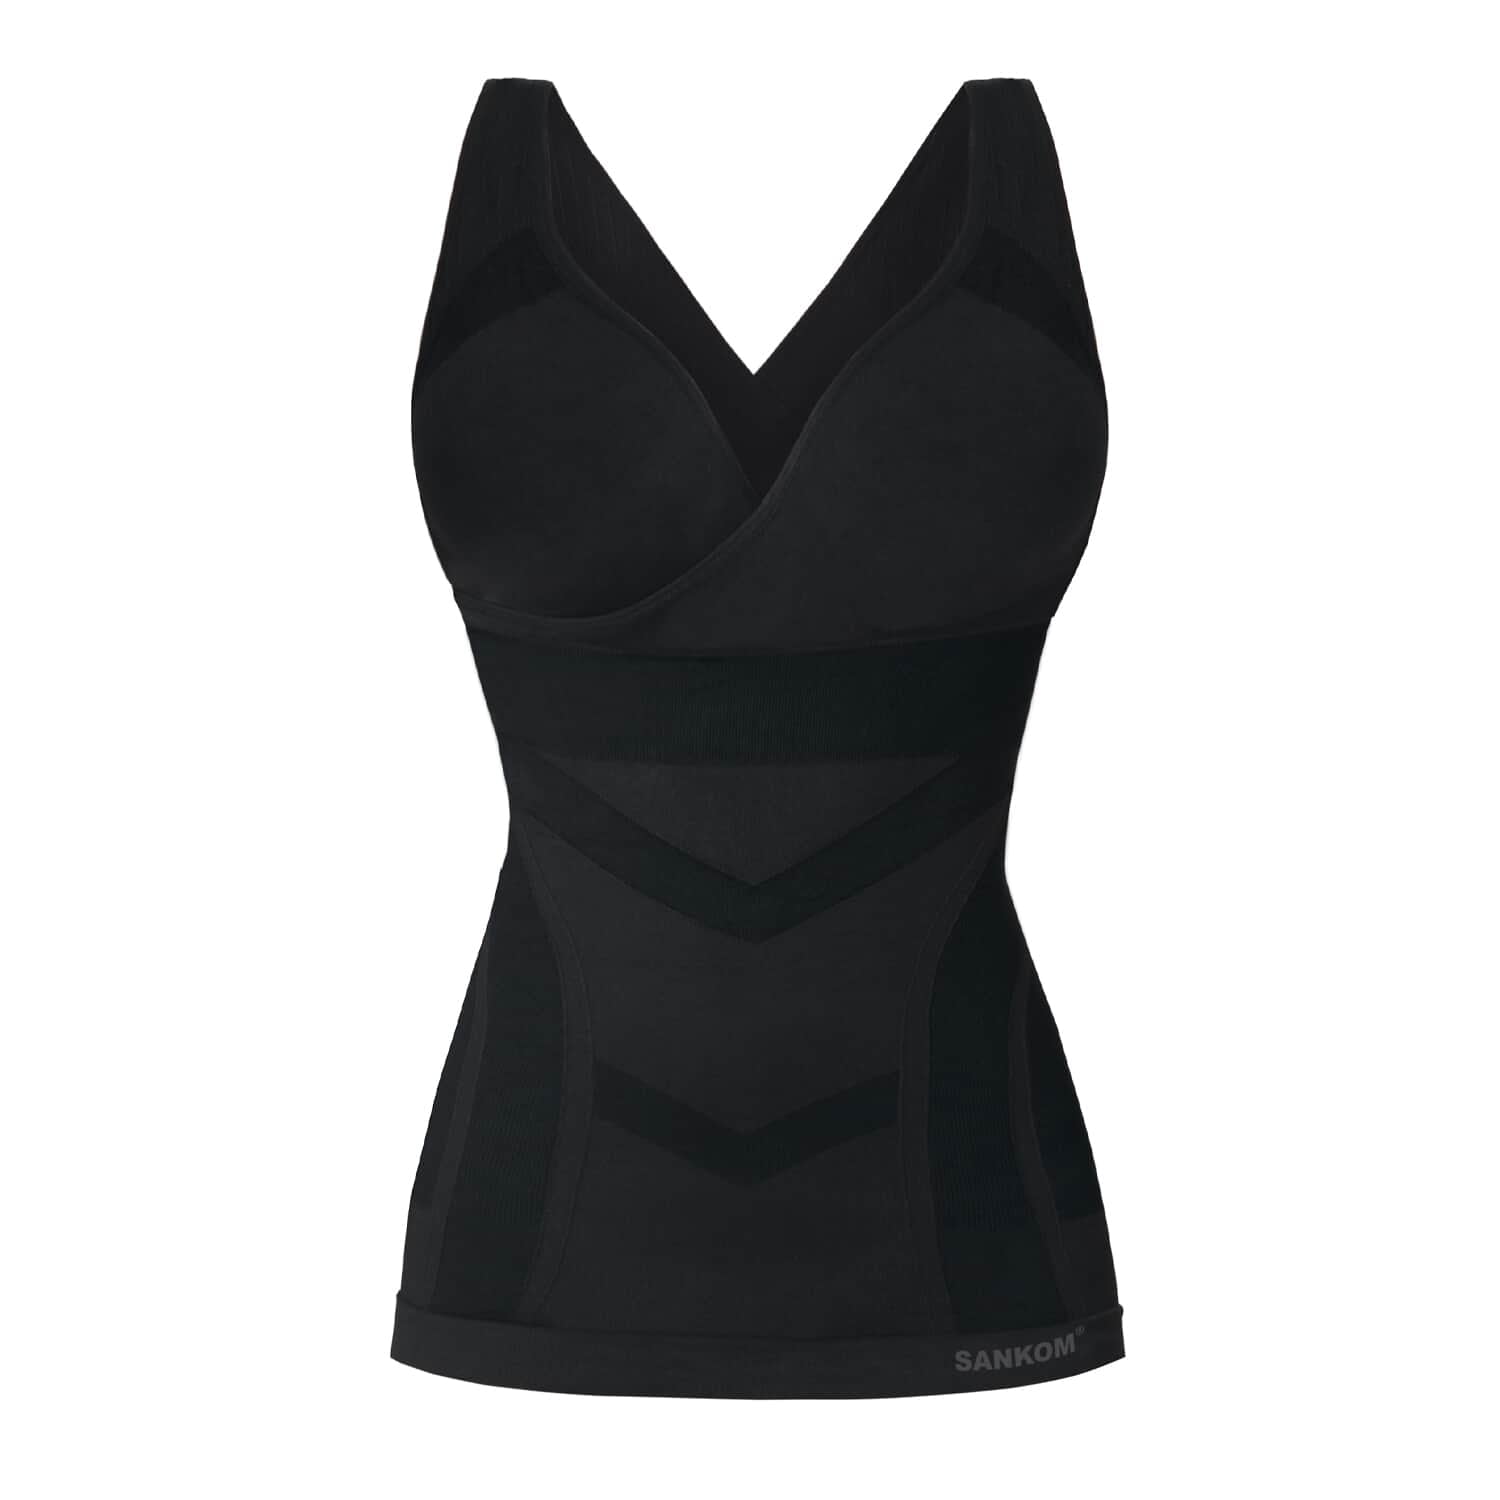 Shop LC SANKOM Body Shaper Posture Corrector Shapewear Patent Fibers  Shaping Camisole with Bra Black XXXL Gifts Christmas Gifts 